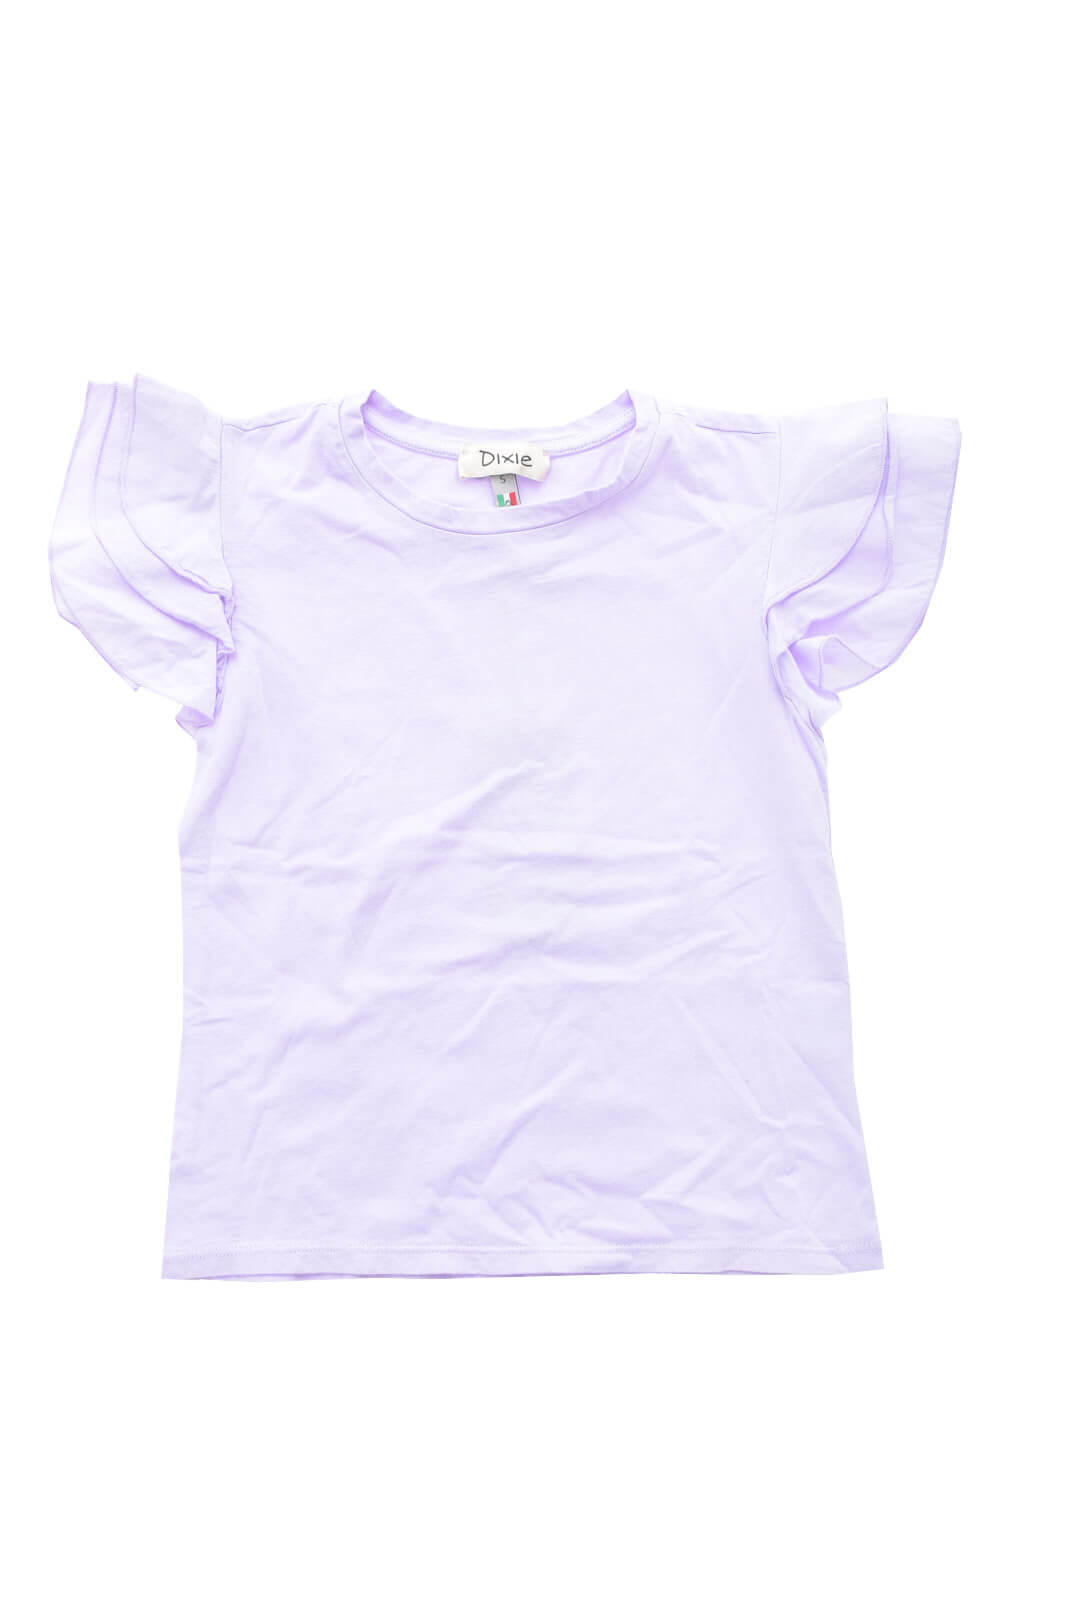 Dixie Girl's T shirt with cap sleeves